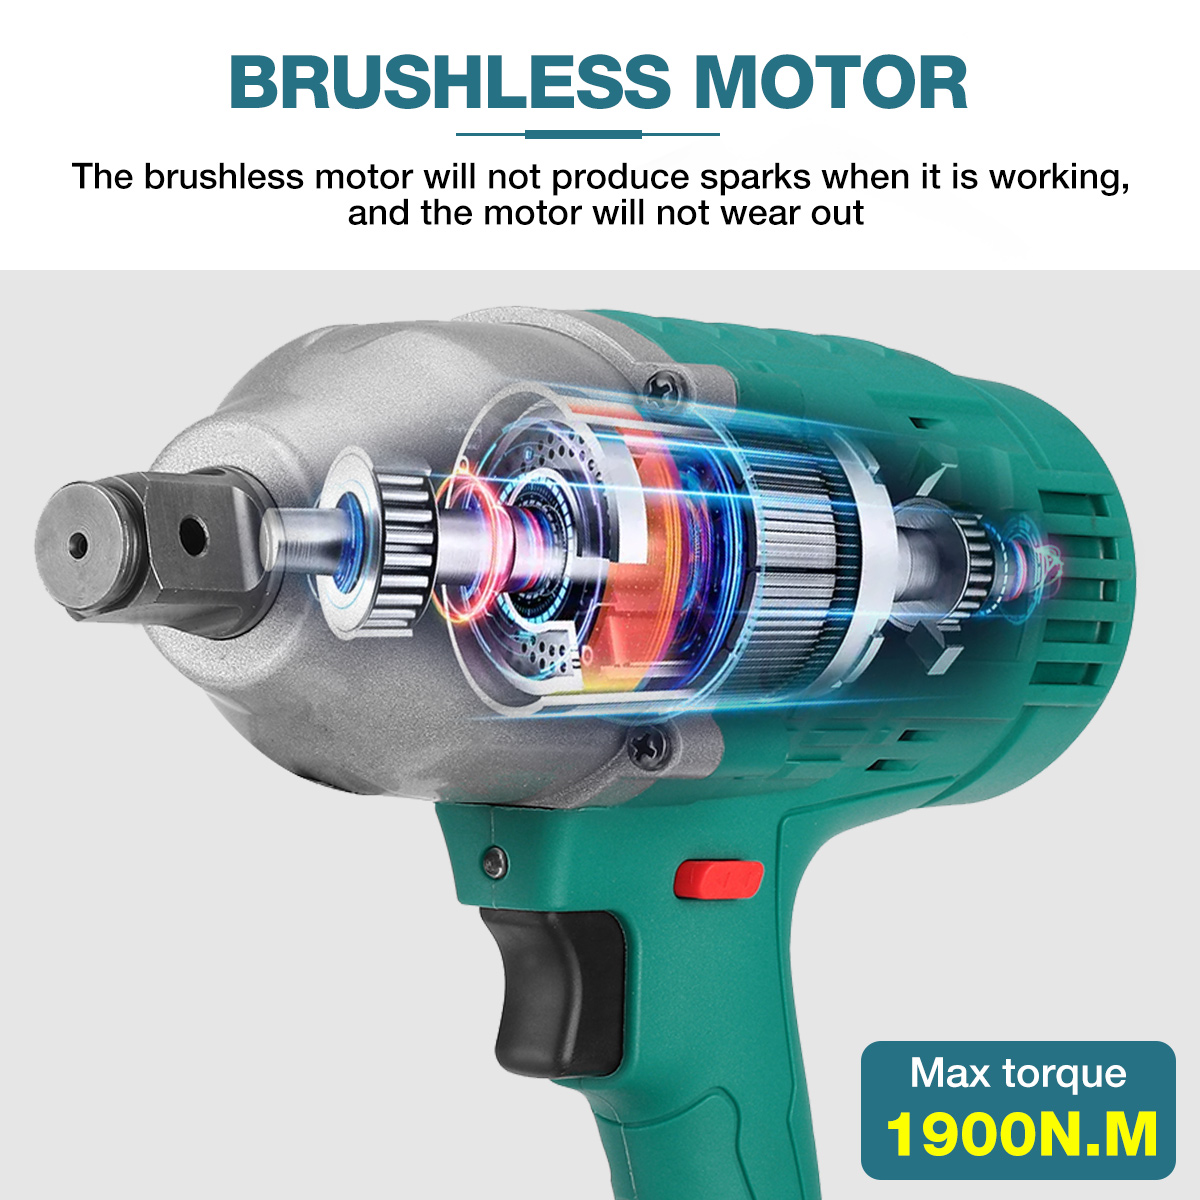 BLMIATKO-18V-1900Nm-Electric-Brushless-Impact-Wrench-Rechargeable-Woodworking-Maintenance-Tool-1943538-2